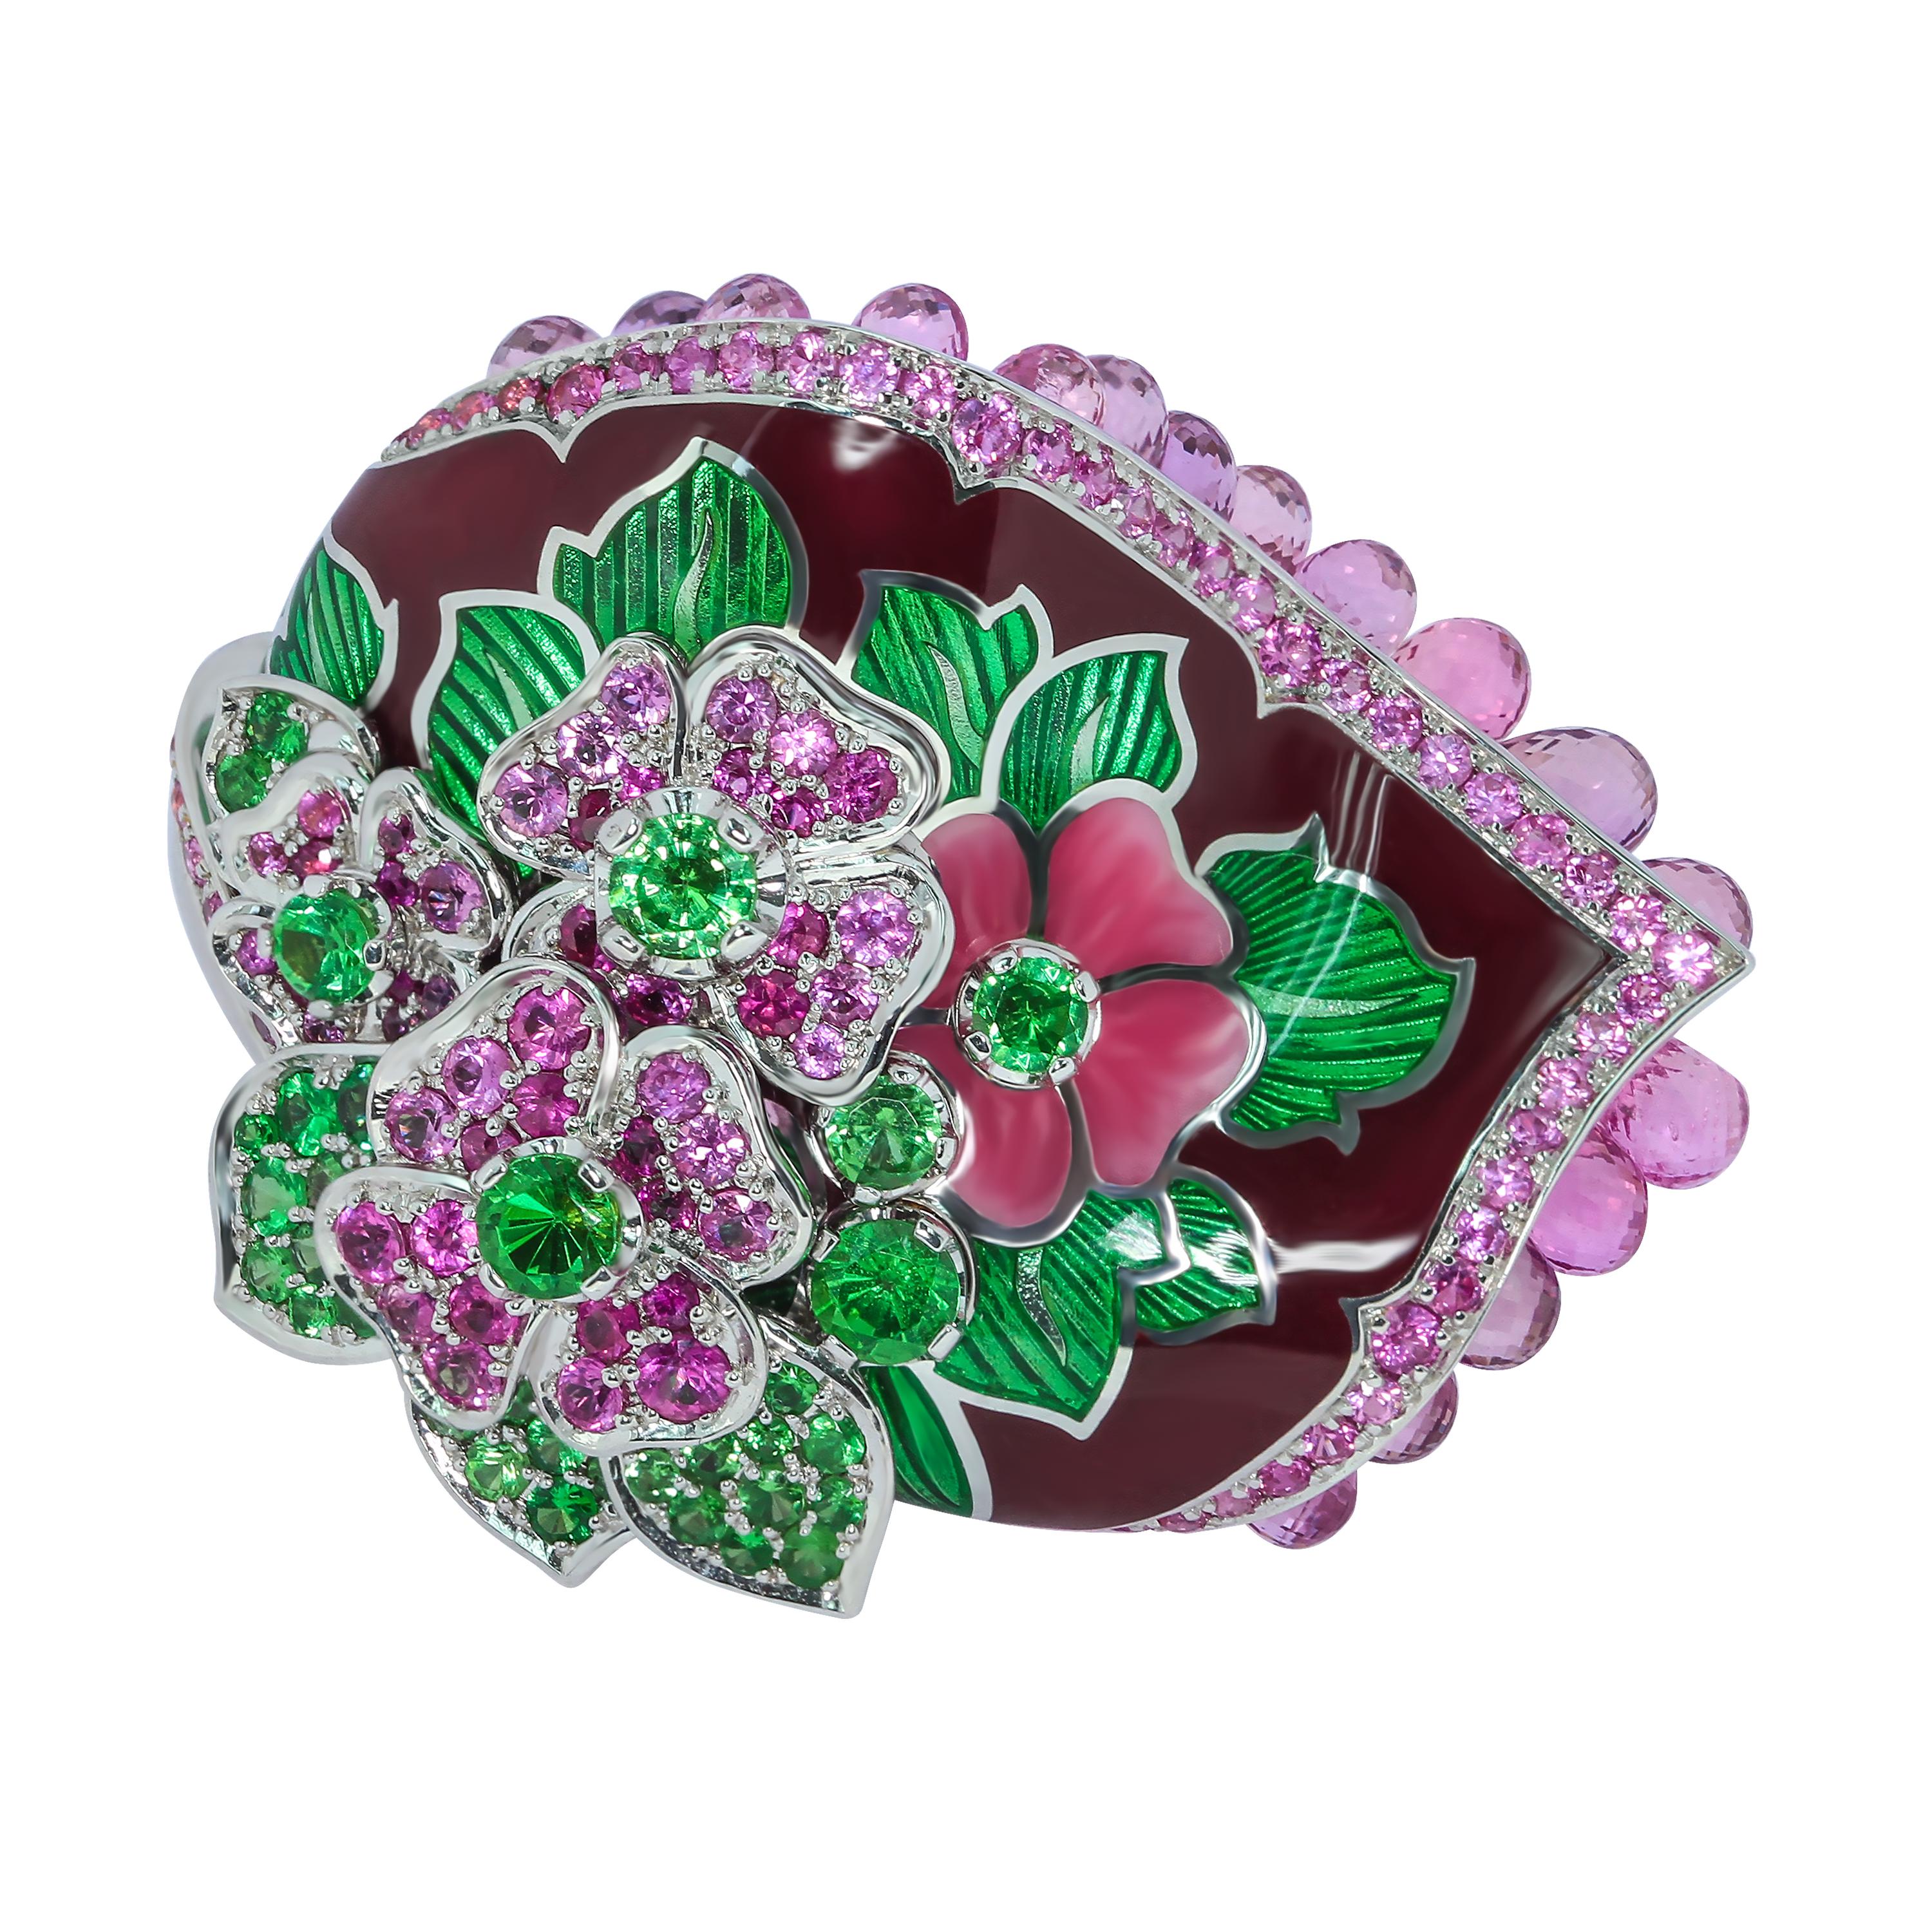 Sapphires Briolettes Tsavorites Enamel 18 Karat White Gold A'la Russe Big Ring
What do you know about Pavlovo Posad shawls? This is a large part of Russian culture, which originated in the 17th century. They are large patterned scarves, which are